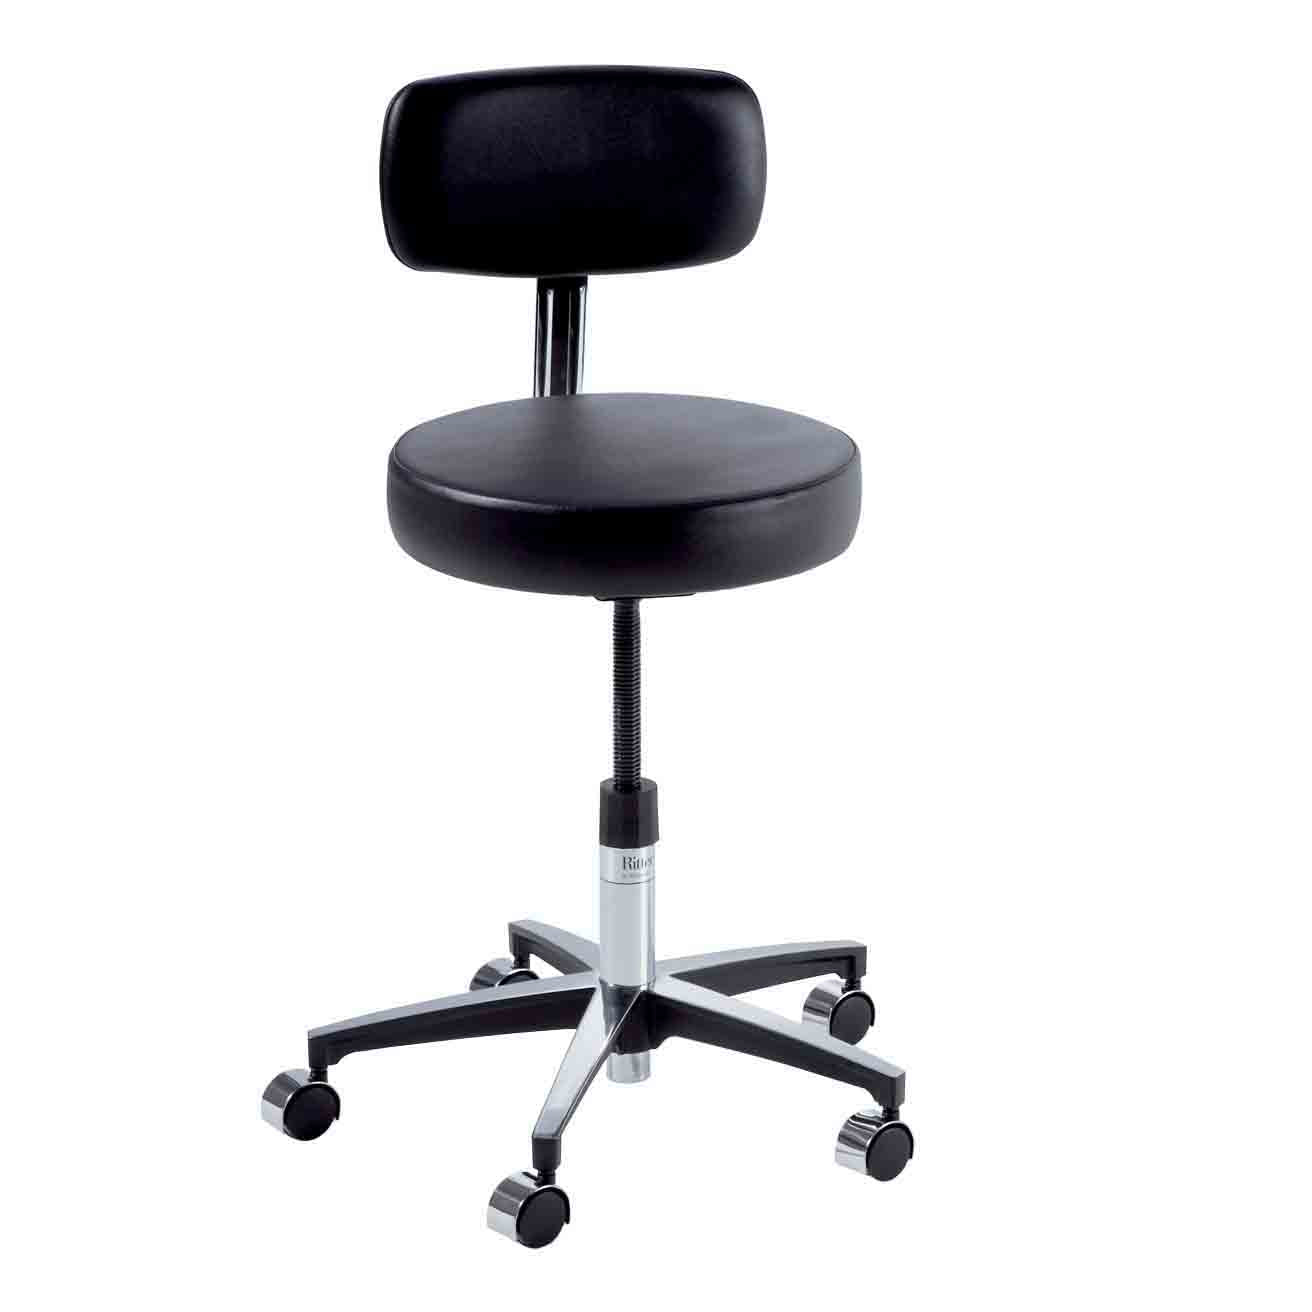 Ritter 275 Adjustable Physician Stool with Auto Locking Casters